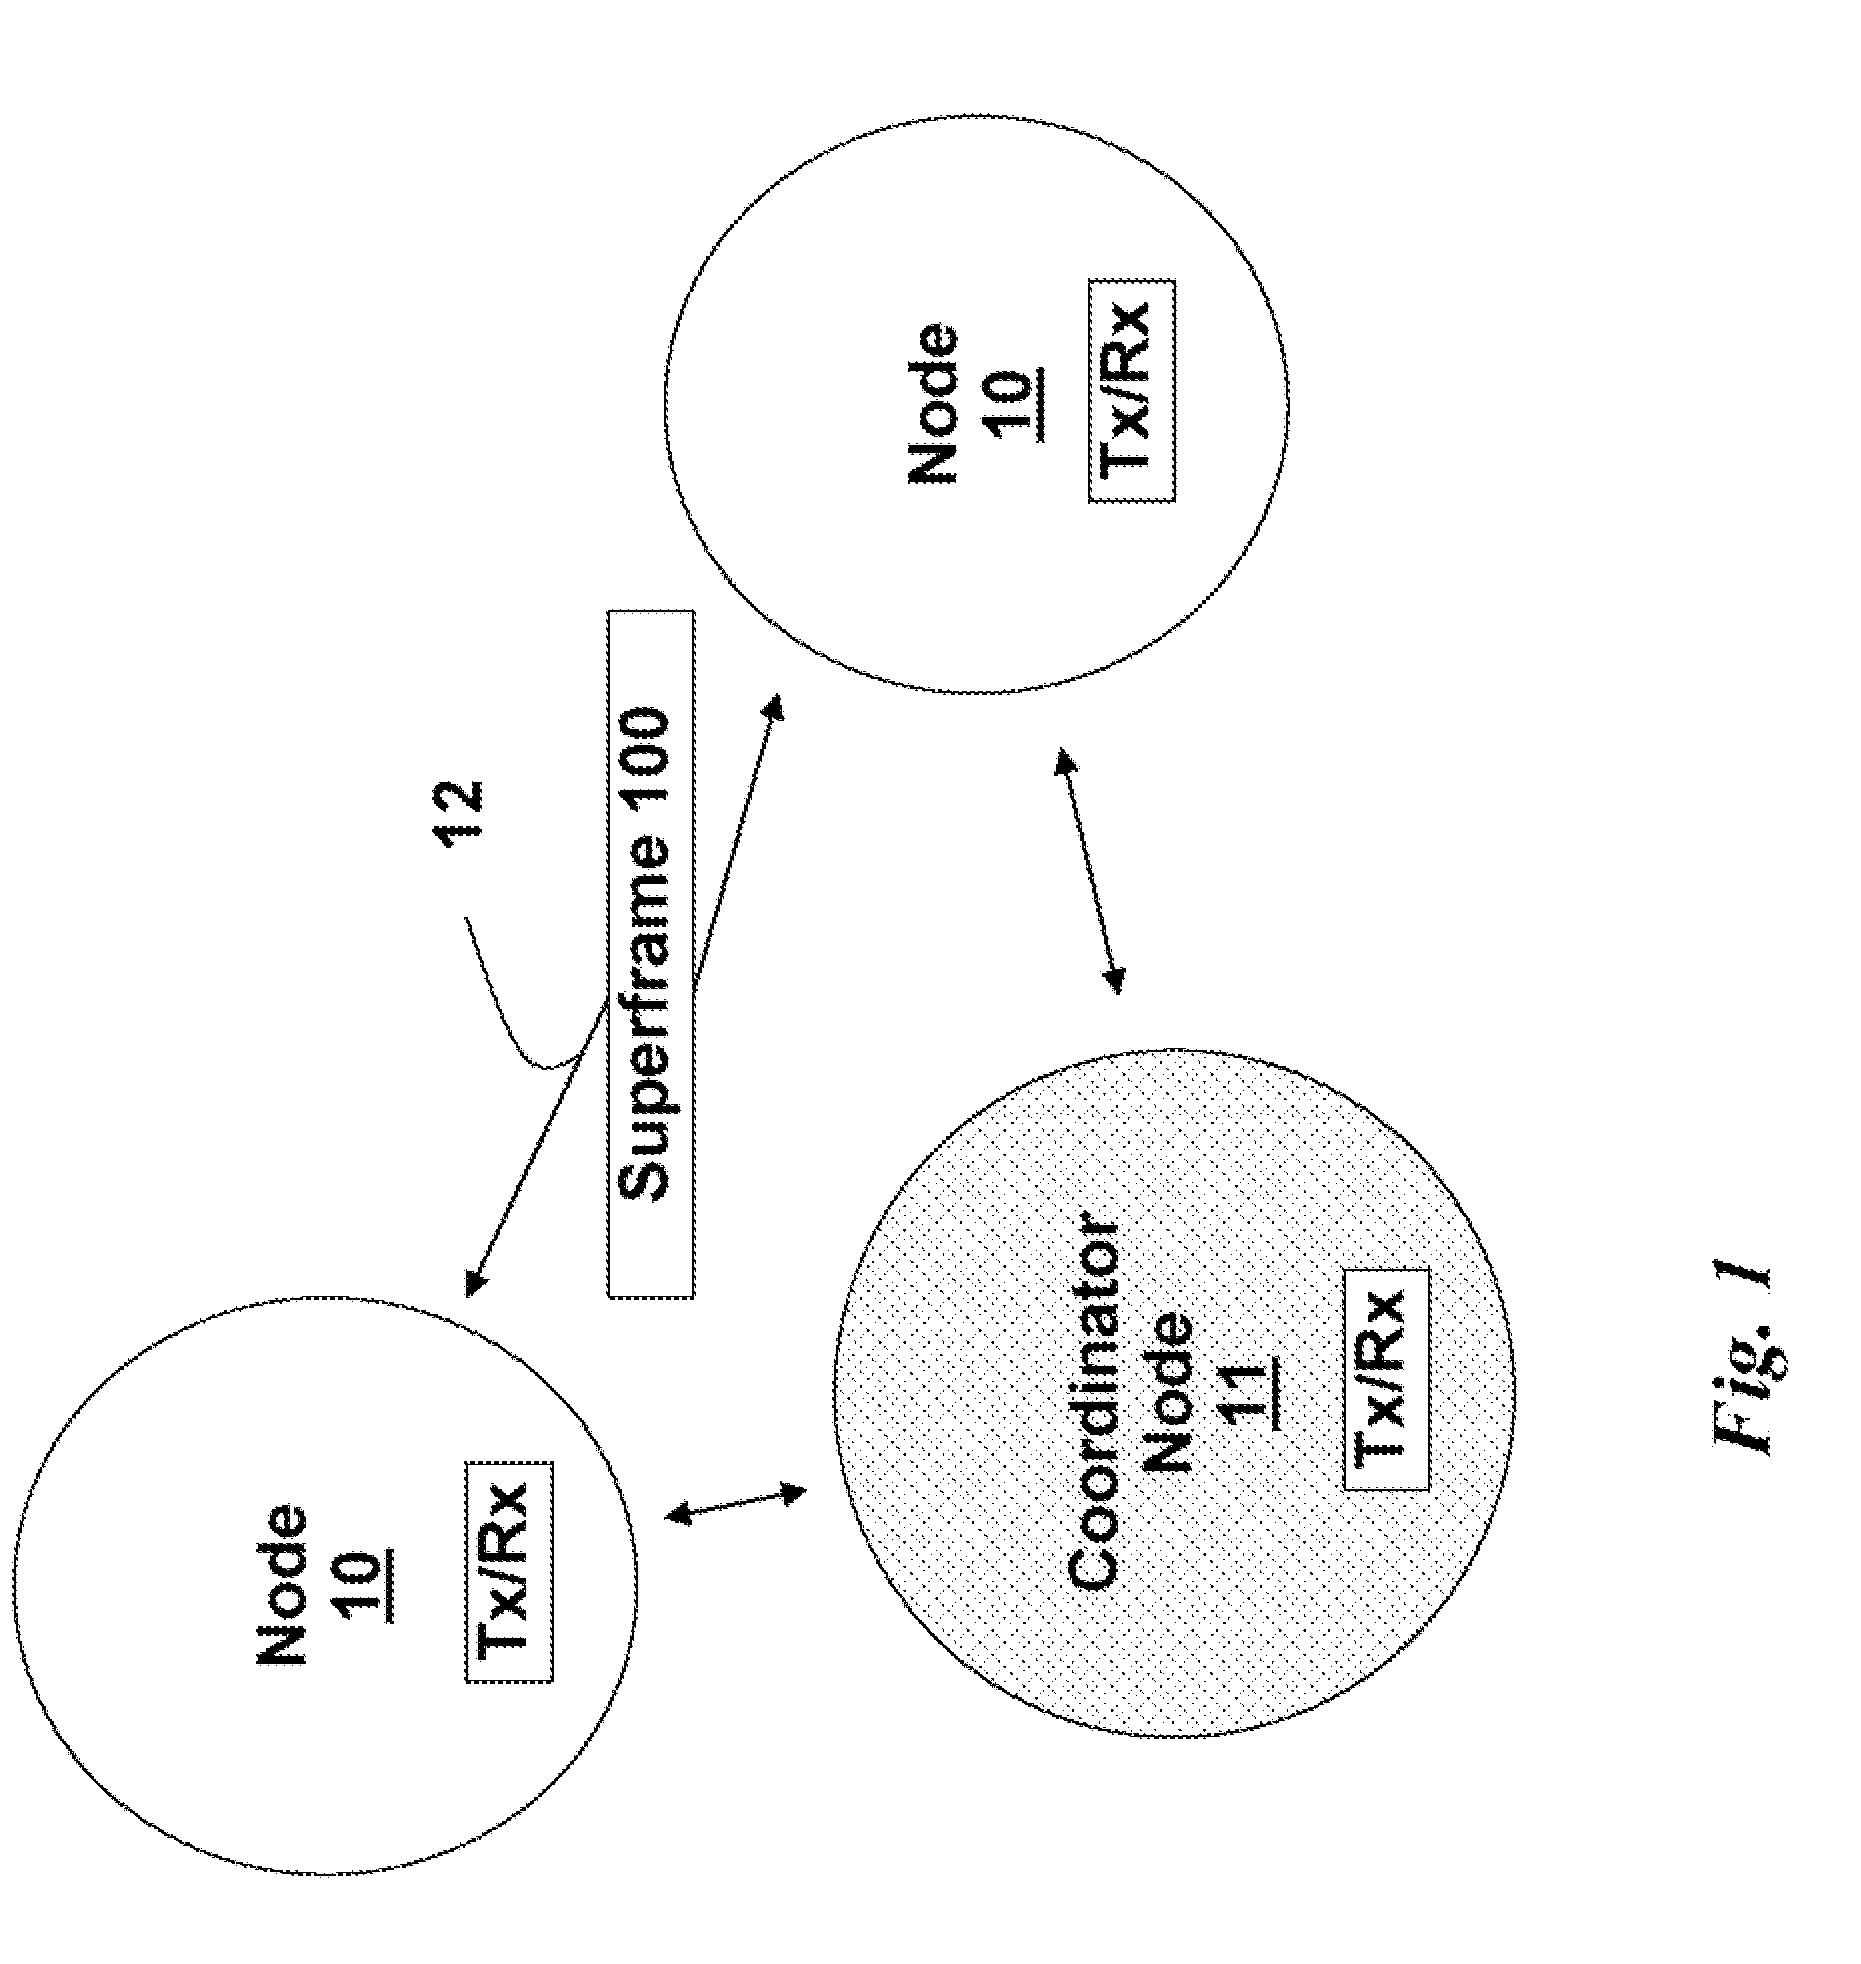 Timeslot Sharing Protocol for Wireless Communication Networks